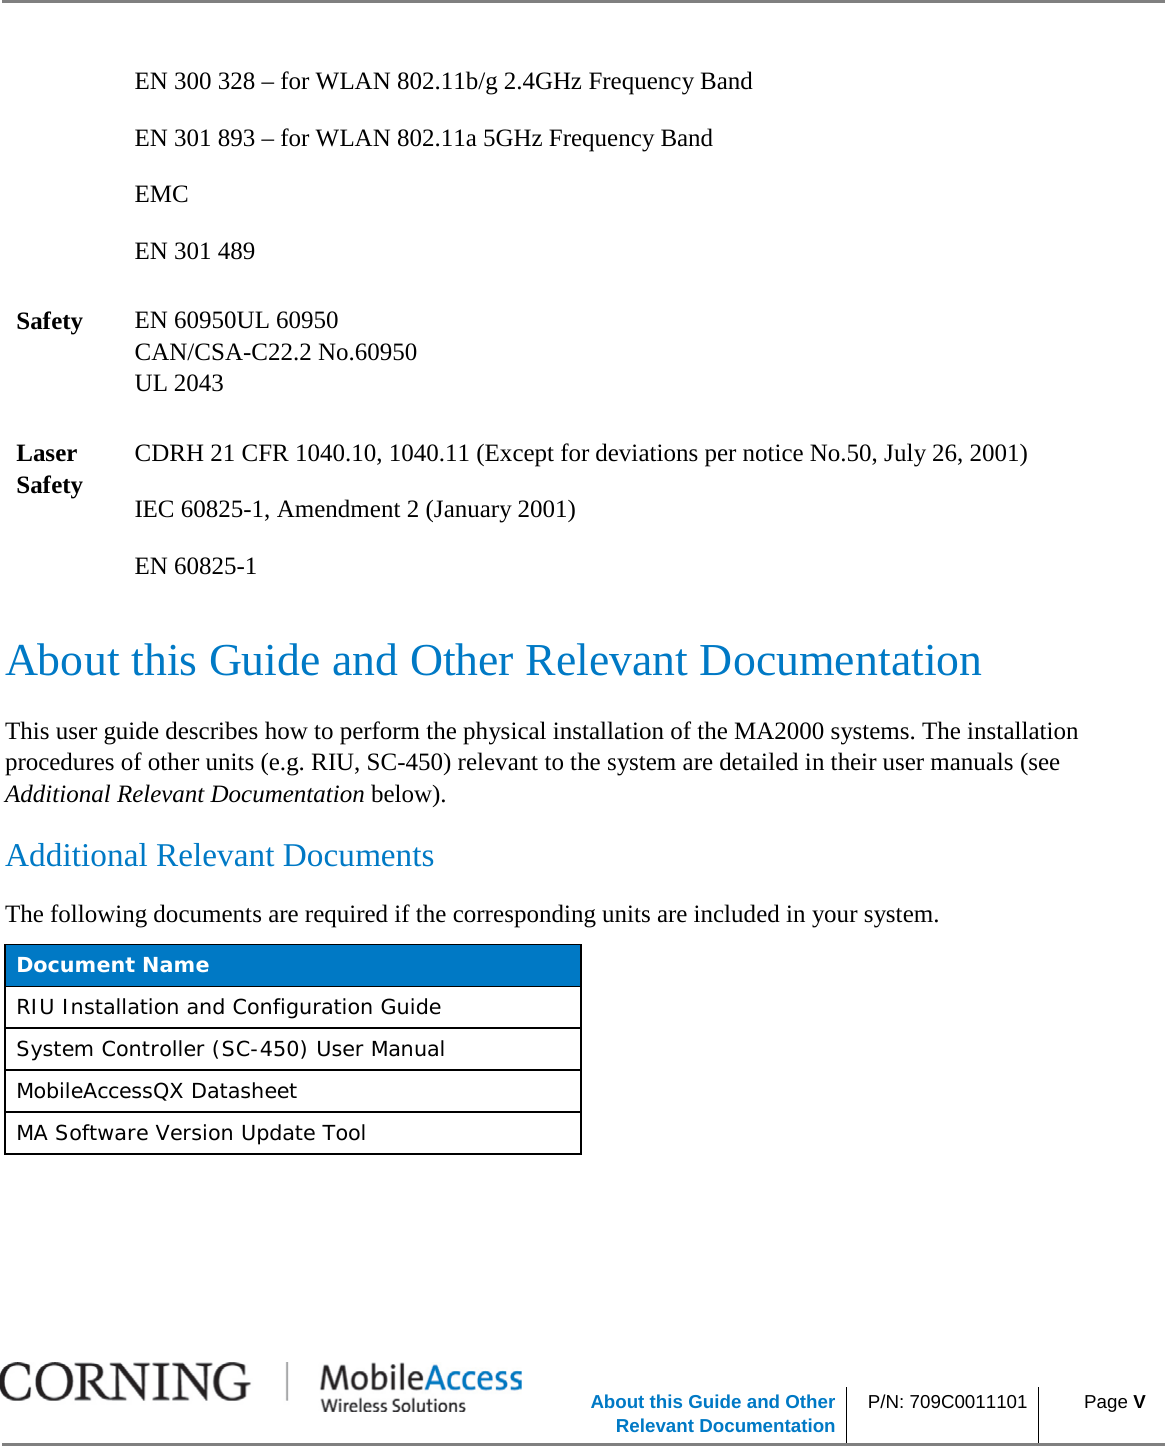            About this Guide and Other Relevant Documentation P/N: 709C0011101  Page V     EN 300 328 – for WLAN 802.11b/g 2.4GHz Frequency Band EN 301 893 – for WLAN 802.11a 5GHz Frequency Band EMC EN 301 489 Safety EN 60950UL 60950 CAN/CSA-C22.2 No.60950  UL 2043 Laser Safety CDRH 21 CFR 1040.10, 1040.11 (Except for deviations per notice No.50, July 26, 2001) IEC 60825-1, Amendment 2 (January 2001) EN 60825-1  About this Guide and Other Relevant Documentation This user guide describes how to perform the physical installation of the MA2000 systems. The installation procedures of other units (e.g. RIU, SC-450) relevant to the system are detailed in their user manuals (see Additional Relevant Documentation below). Additional Relevant Documents The following documents are required if the corresponding units are included in your system. Document Name RIU Installation and Configuration Guide System Controller (SC-450) User Manual MobileAccessQX Datasheet MA Software Version Update Tool    